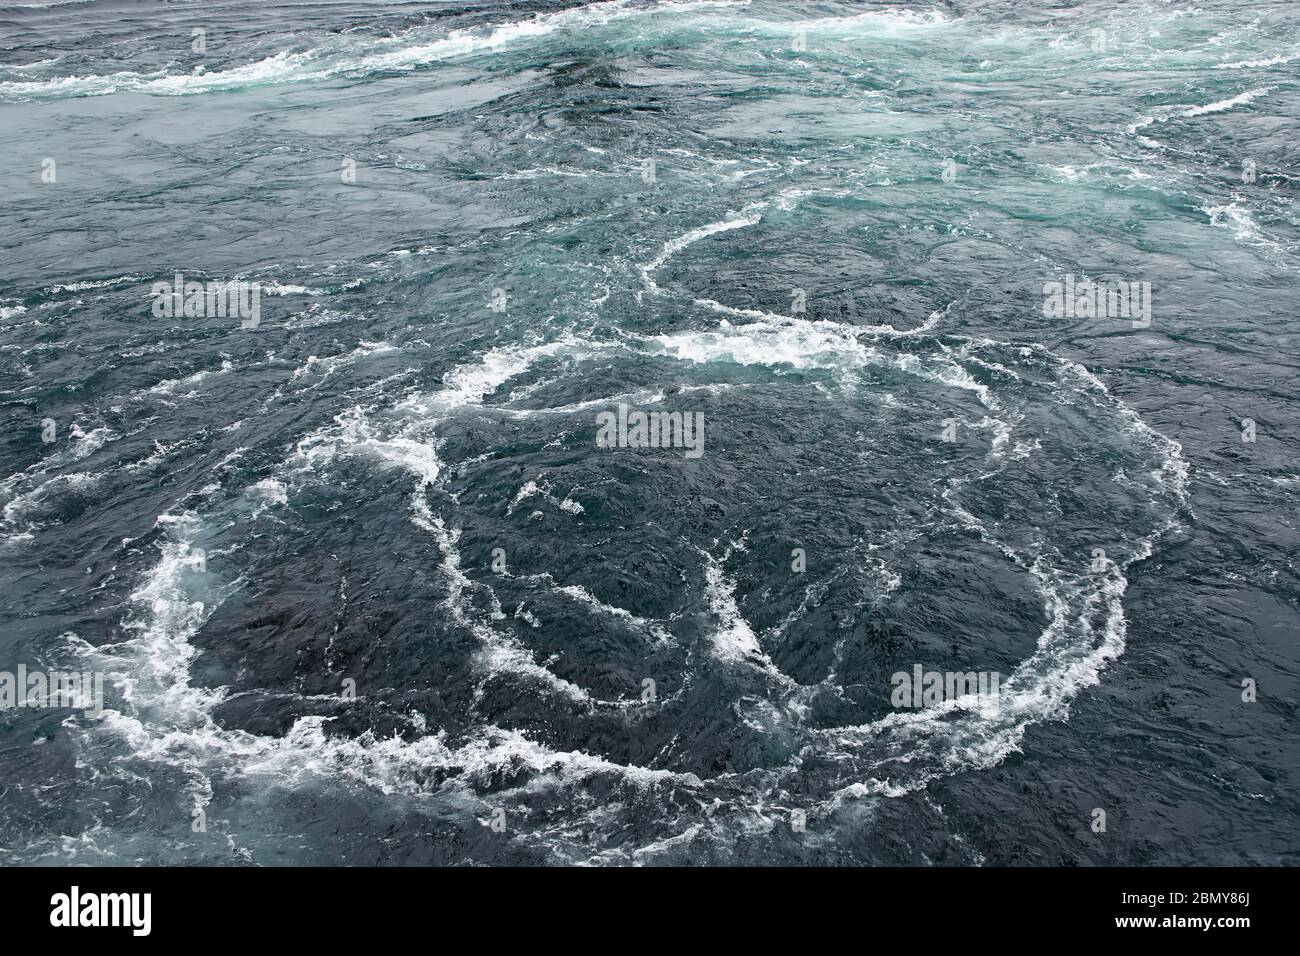 Saltstraumen Maelstrom - which is said to be the world’s strongest tidal currents with whirlpools or Vortices , Bodo, Nordland county, Norway. Stock Photo